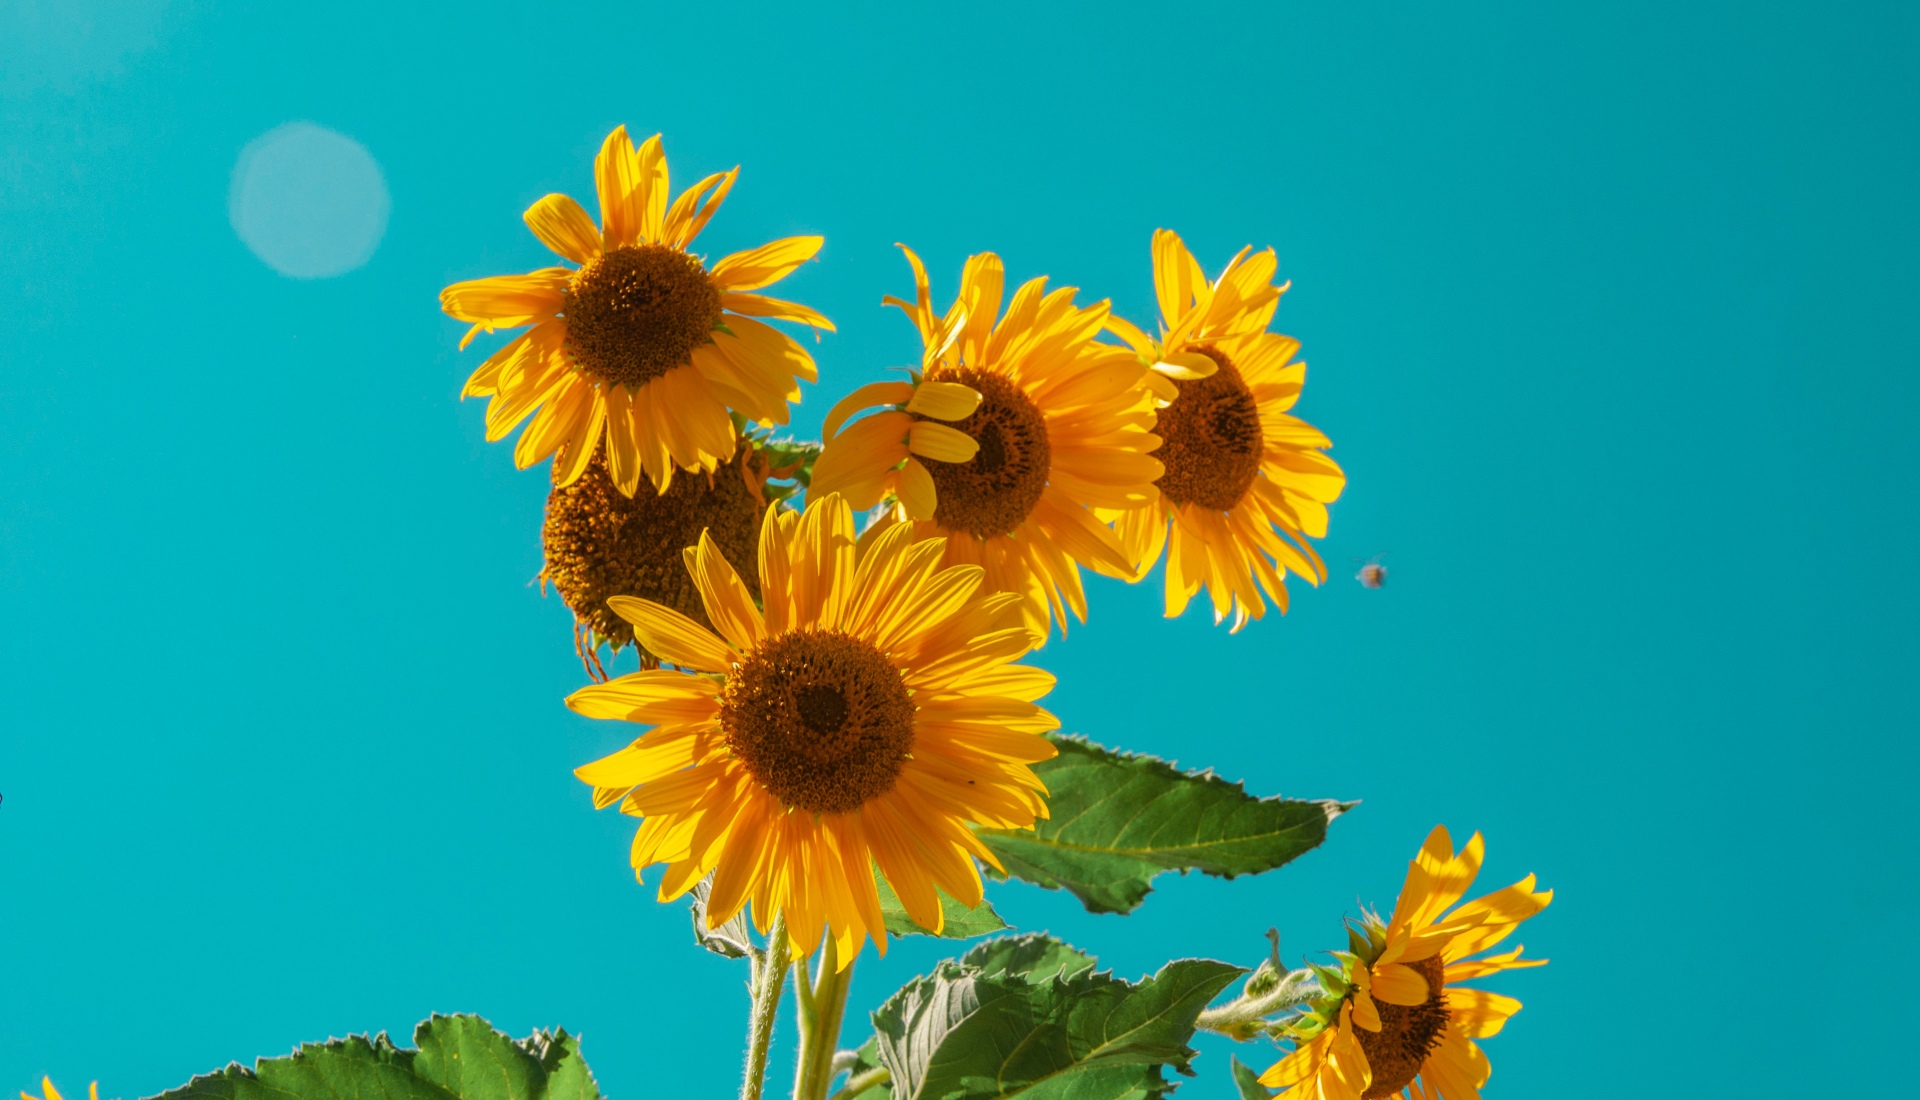 Sunflowers on a blue background